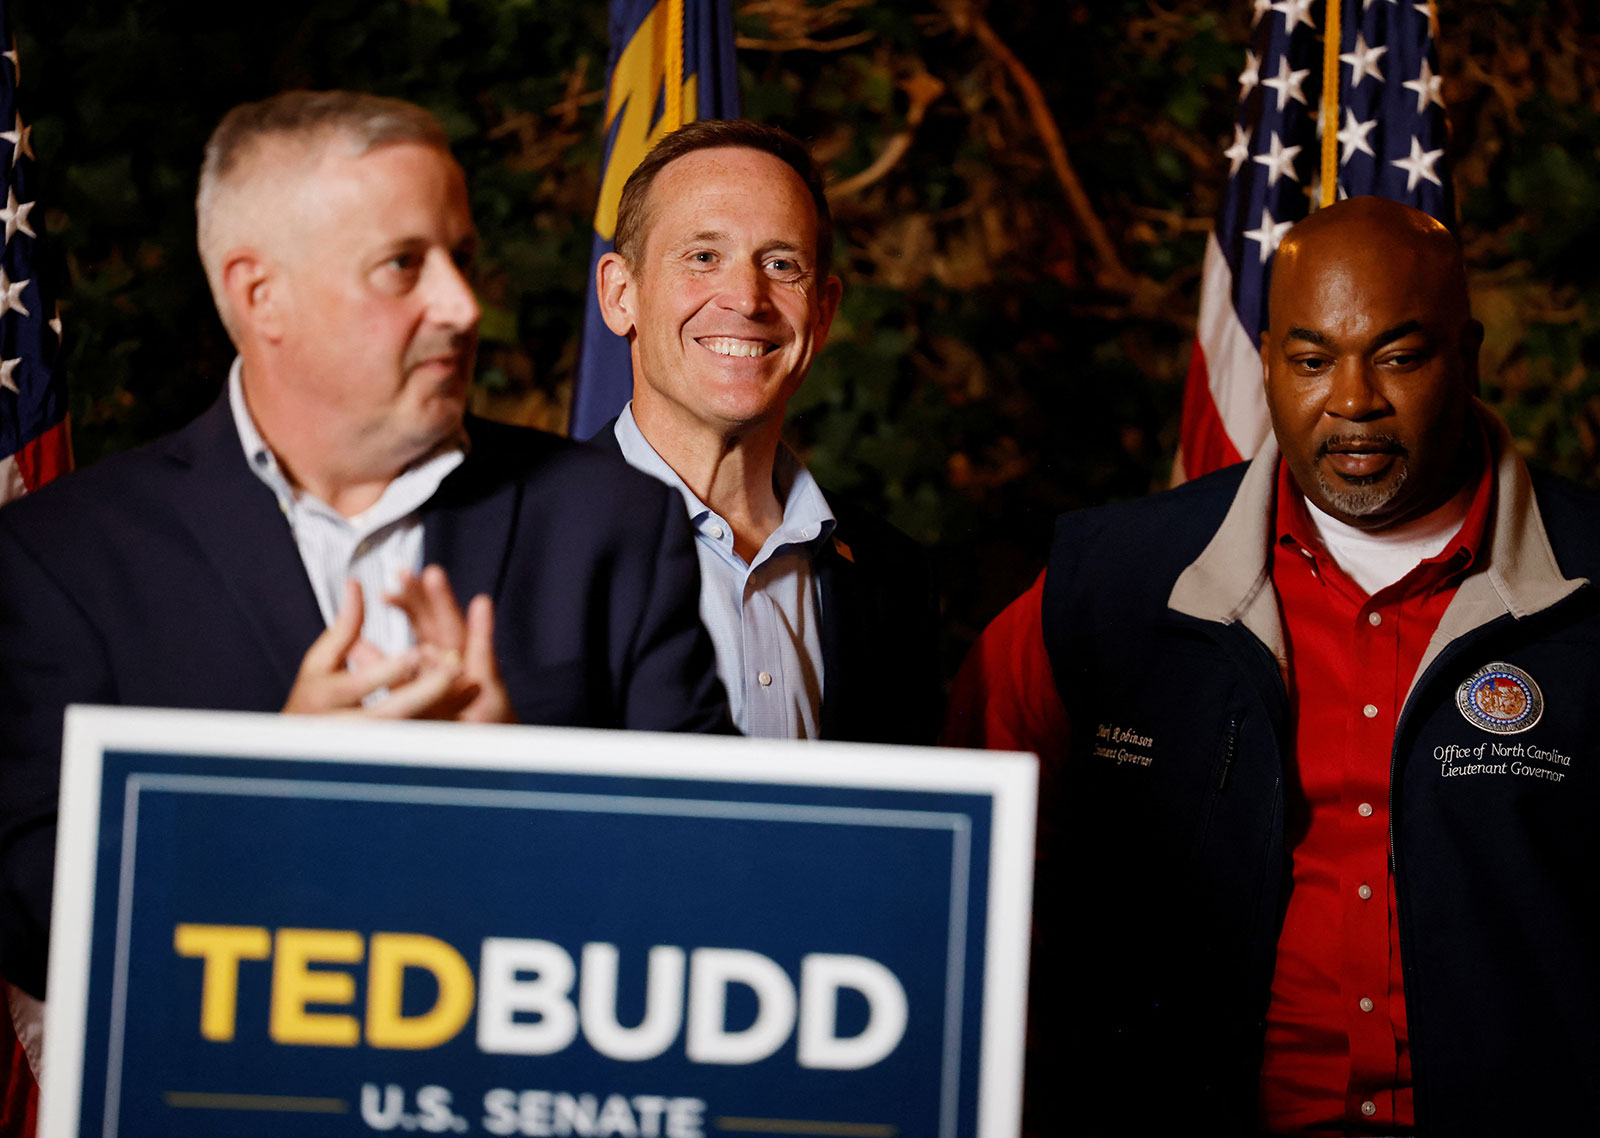 Rep. Ted Budd, flanked by the Republican state party chair Michael Whatley and North Carolina Lt. Gov. Mark Robinson, participate in a campaign event in Raleigh, North Carolina, on November 7. 